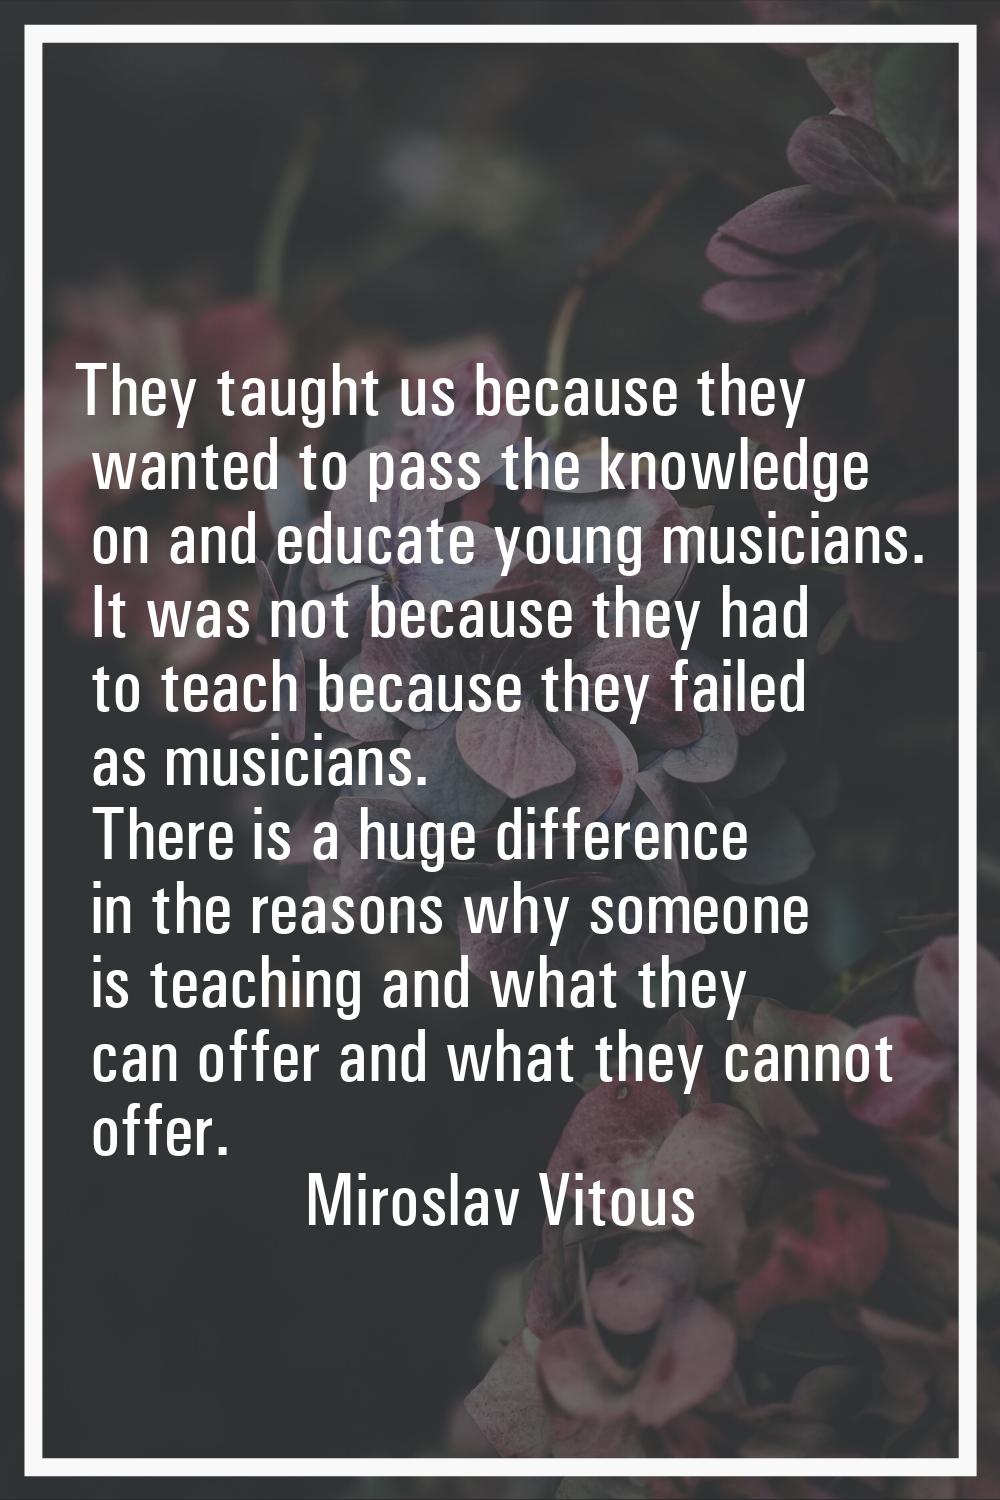 They taught us because they wanted to pass the knowledge on and educate young musicians. It was not